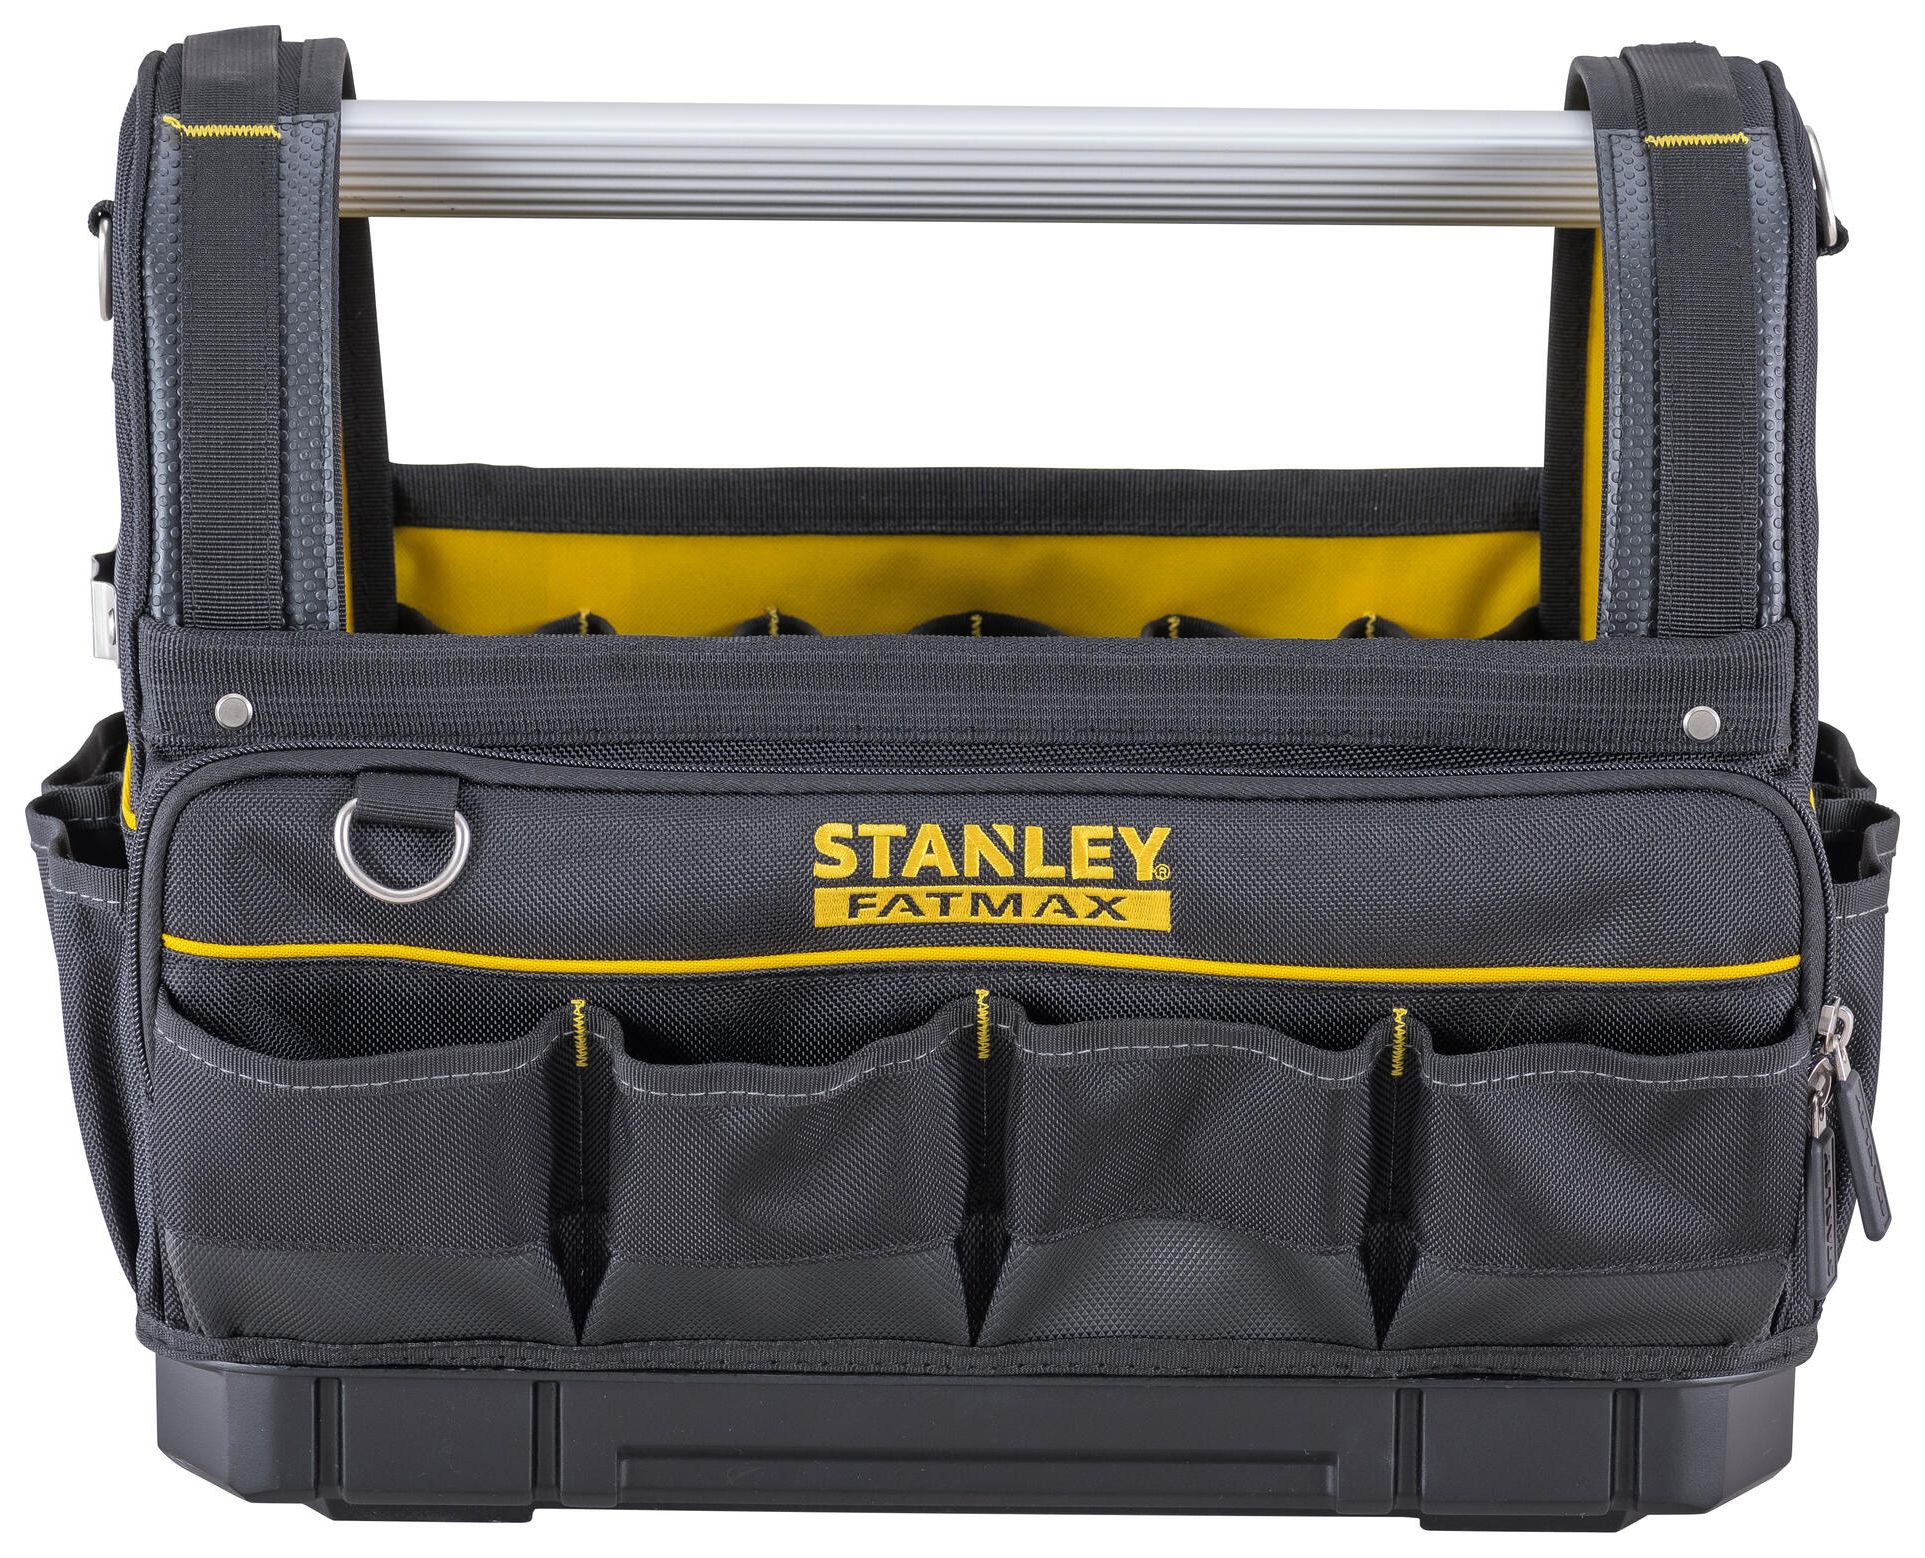 STANLEY FATMAX PROSTACK™ Tool Storage Soft Tote